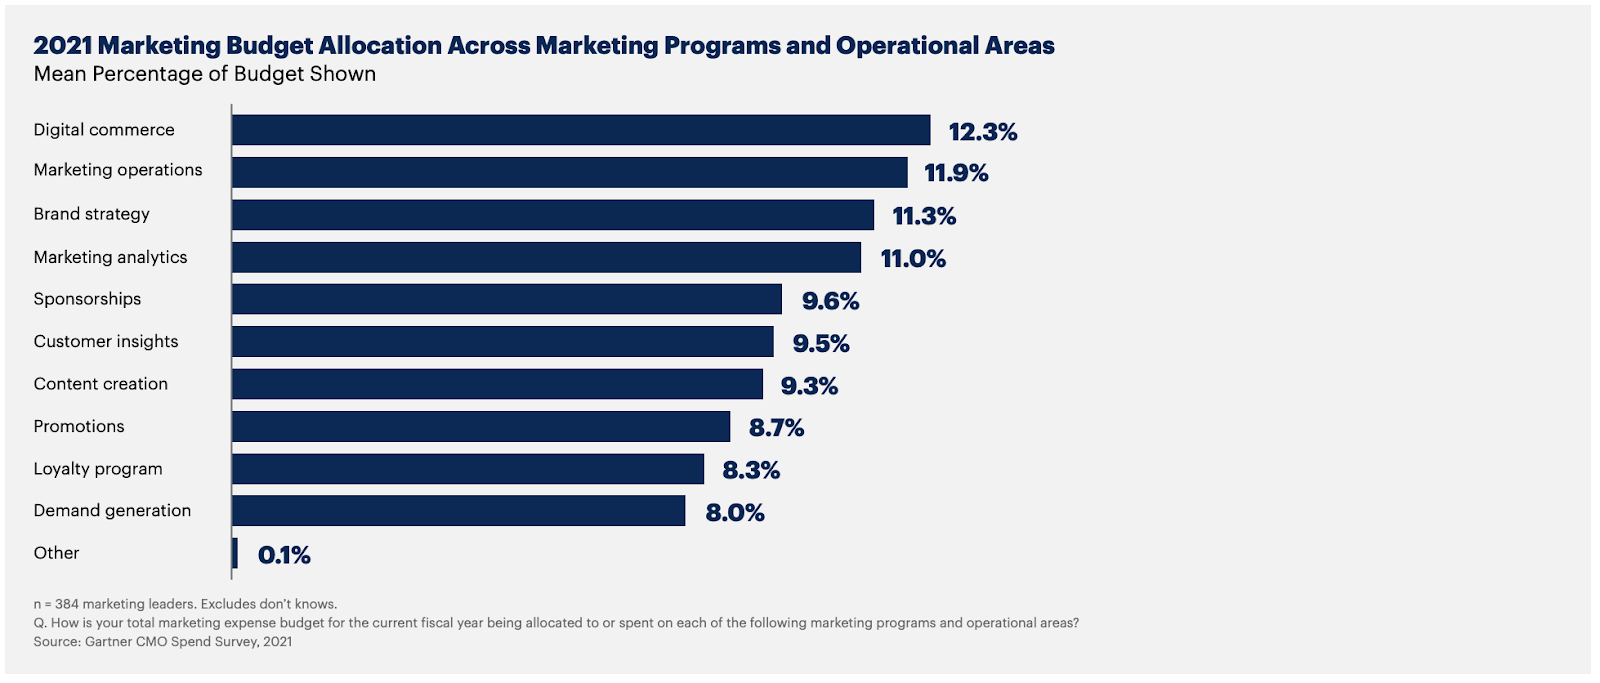 2021 Marketing Budget Allocation Across Marketing Programs and Operational Areas chart from Gartner's annual CMO spend survey.